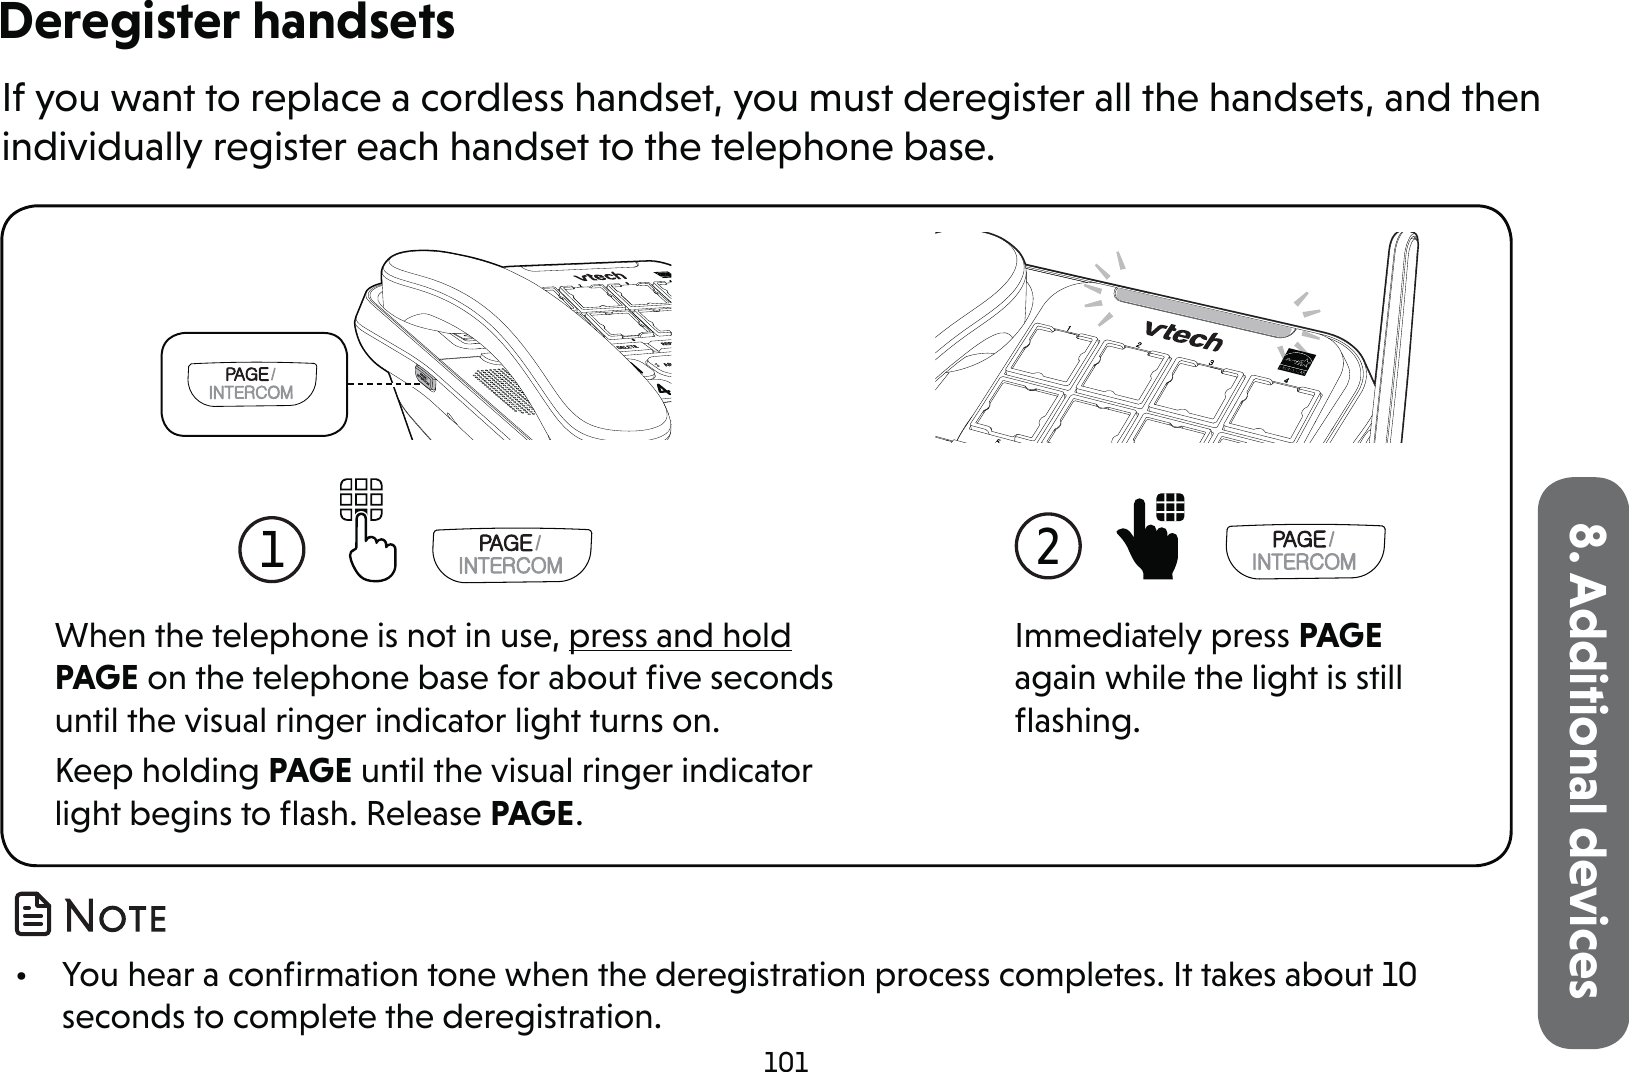 1018. Additional devicesDeregister handsetsIf you want to replace a cordless handset, you must deregister all the handsets, and then individually register each handset to the telephone base. •  You hear a conﬁrmation tone when the deregistration process completes. It takes about 10 seconds to complete the deregistration.1 When the telephone is not in use, press and hold PAGE on the telephone base for about ﬁve seconds until the visual ringer indicator light turns on.Keep holding PAGE until the visual ringer indicator light begins to ﬂash. Release PAGE.2 Immediately press PAGE again while the light is still ﬂashing.